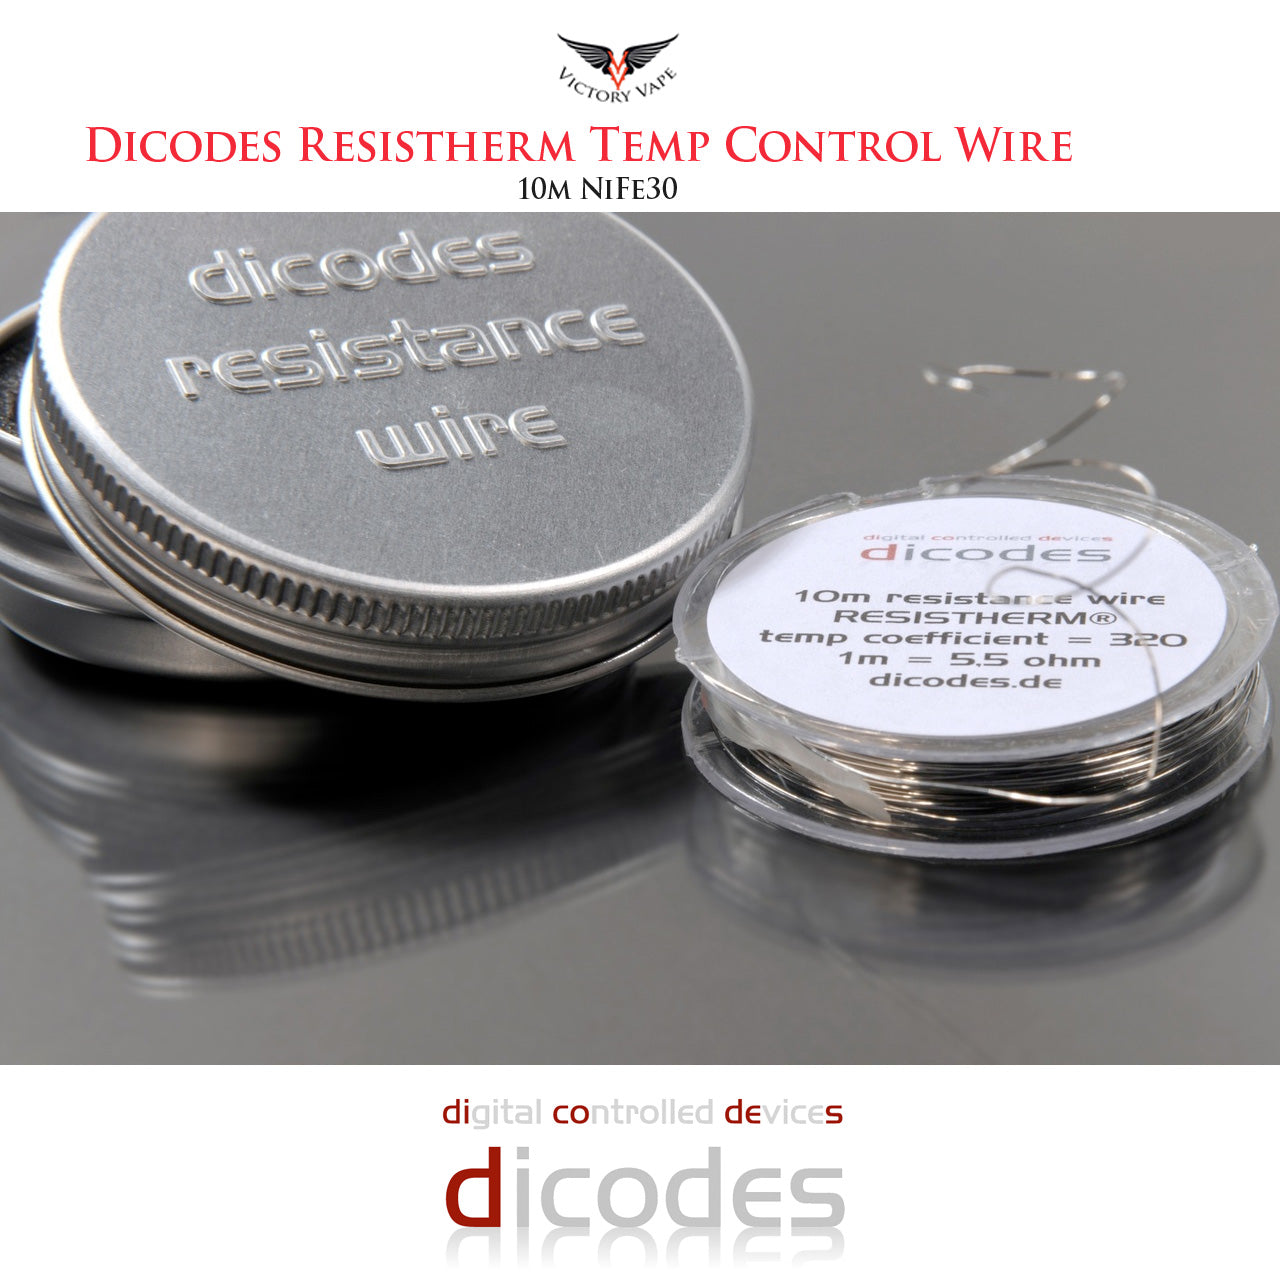  DiCodes Resistance wire 10m NiFe30 Resistherm 